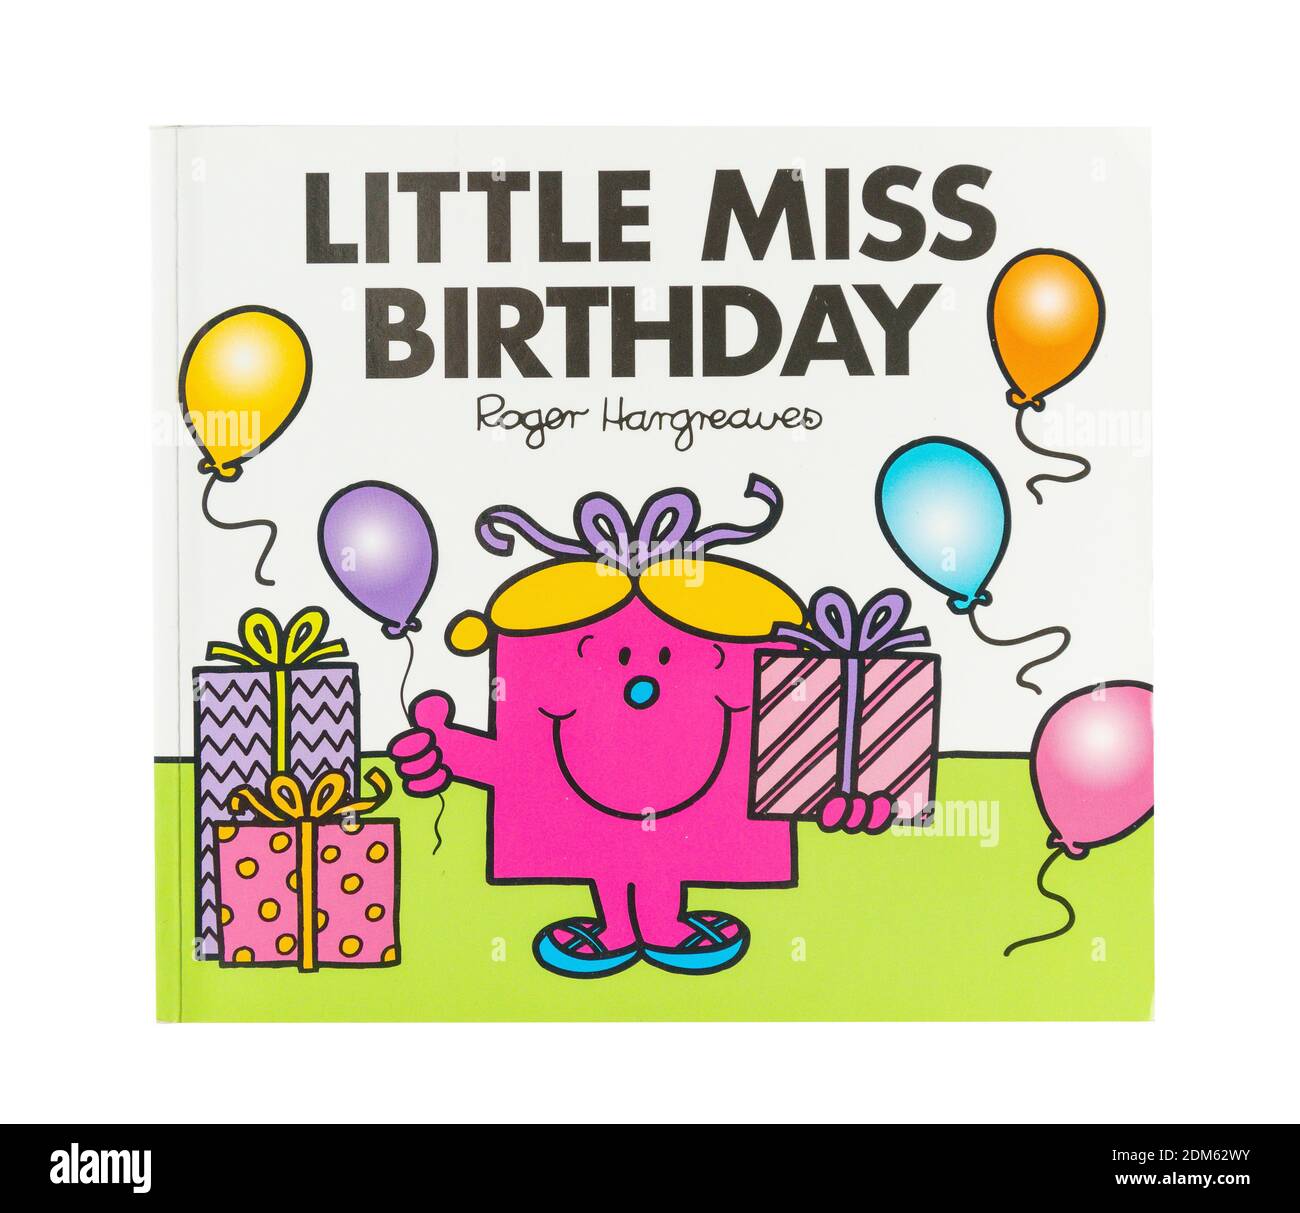 Little Miss Birthday by Roger Hargreaves, Greater London, England, United Kingdom Stock Photo